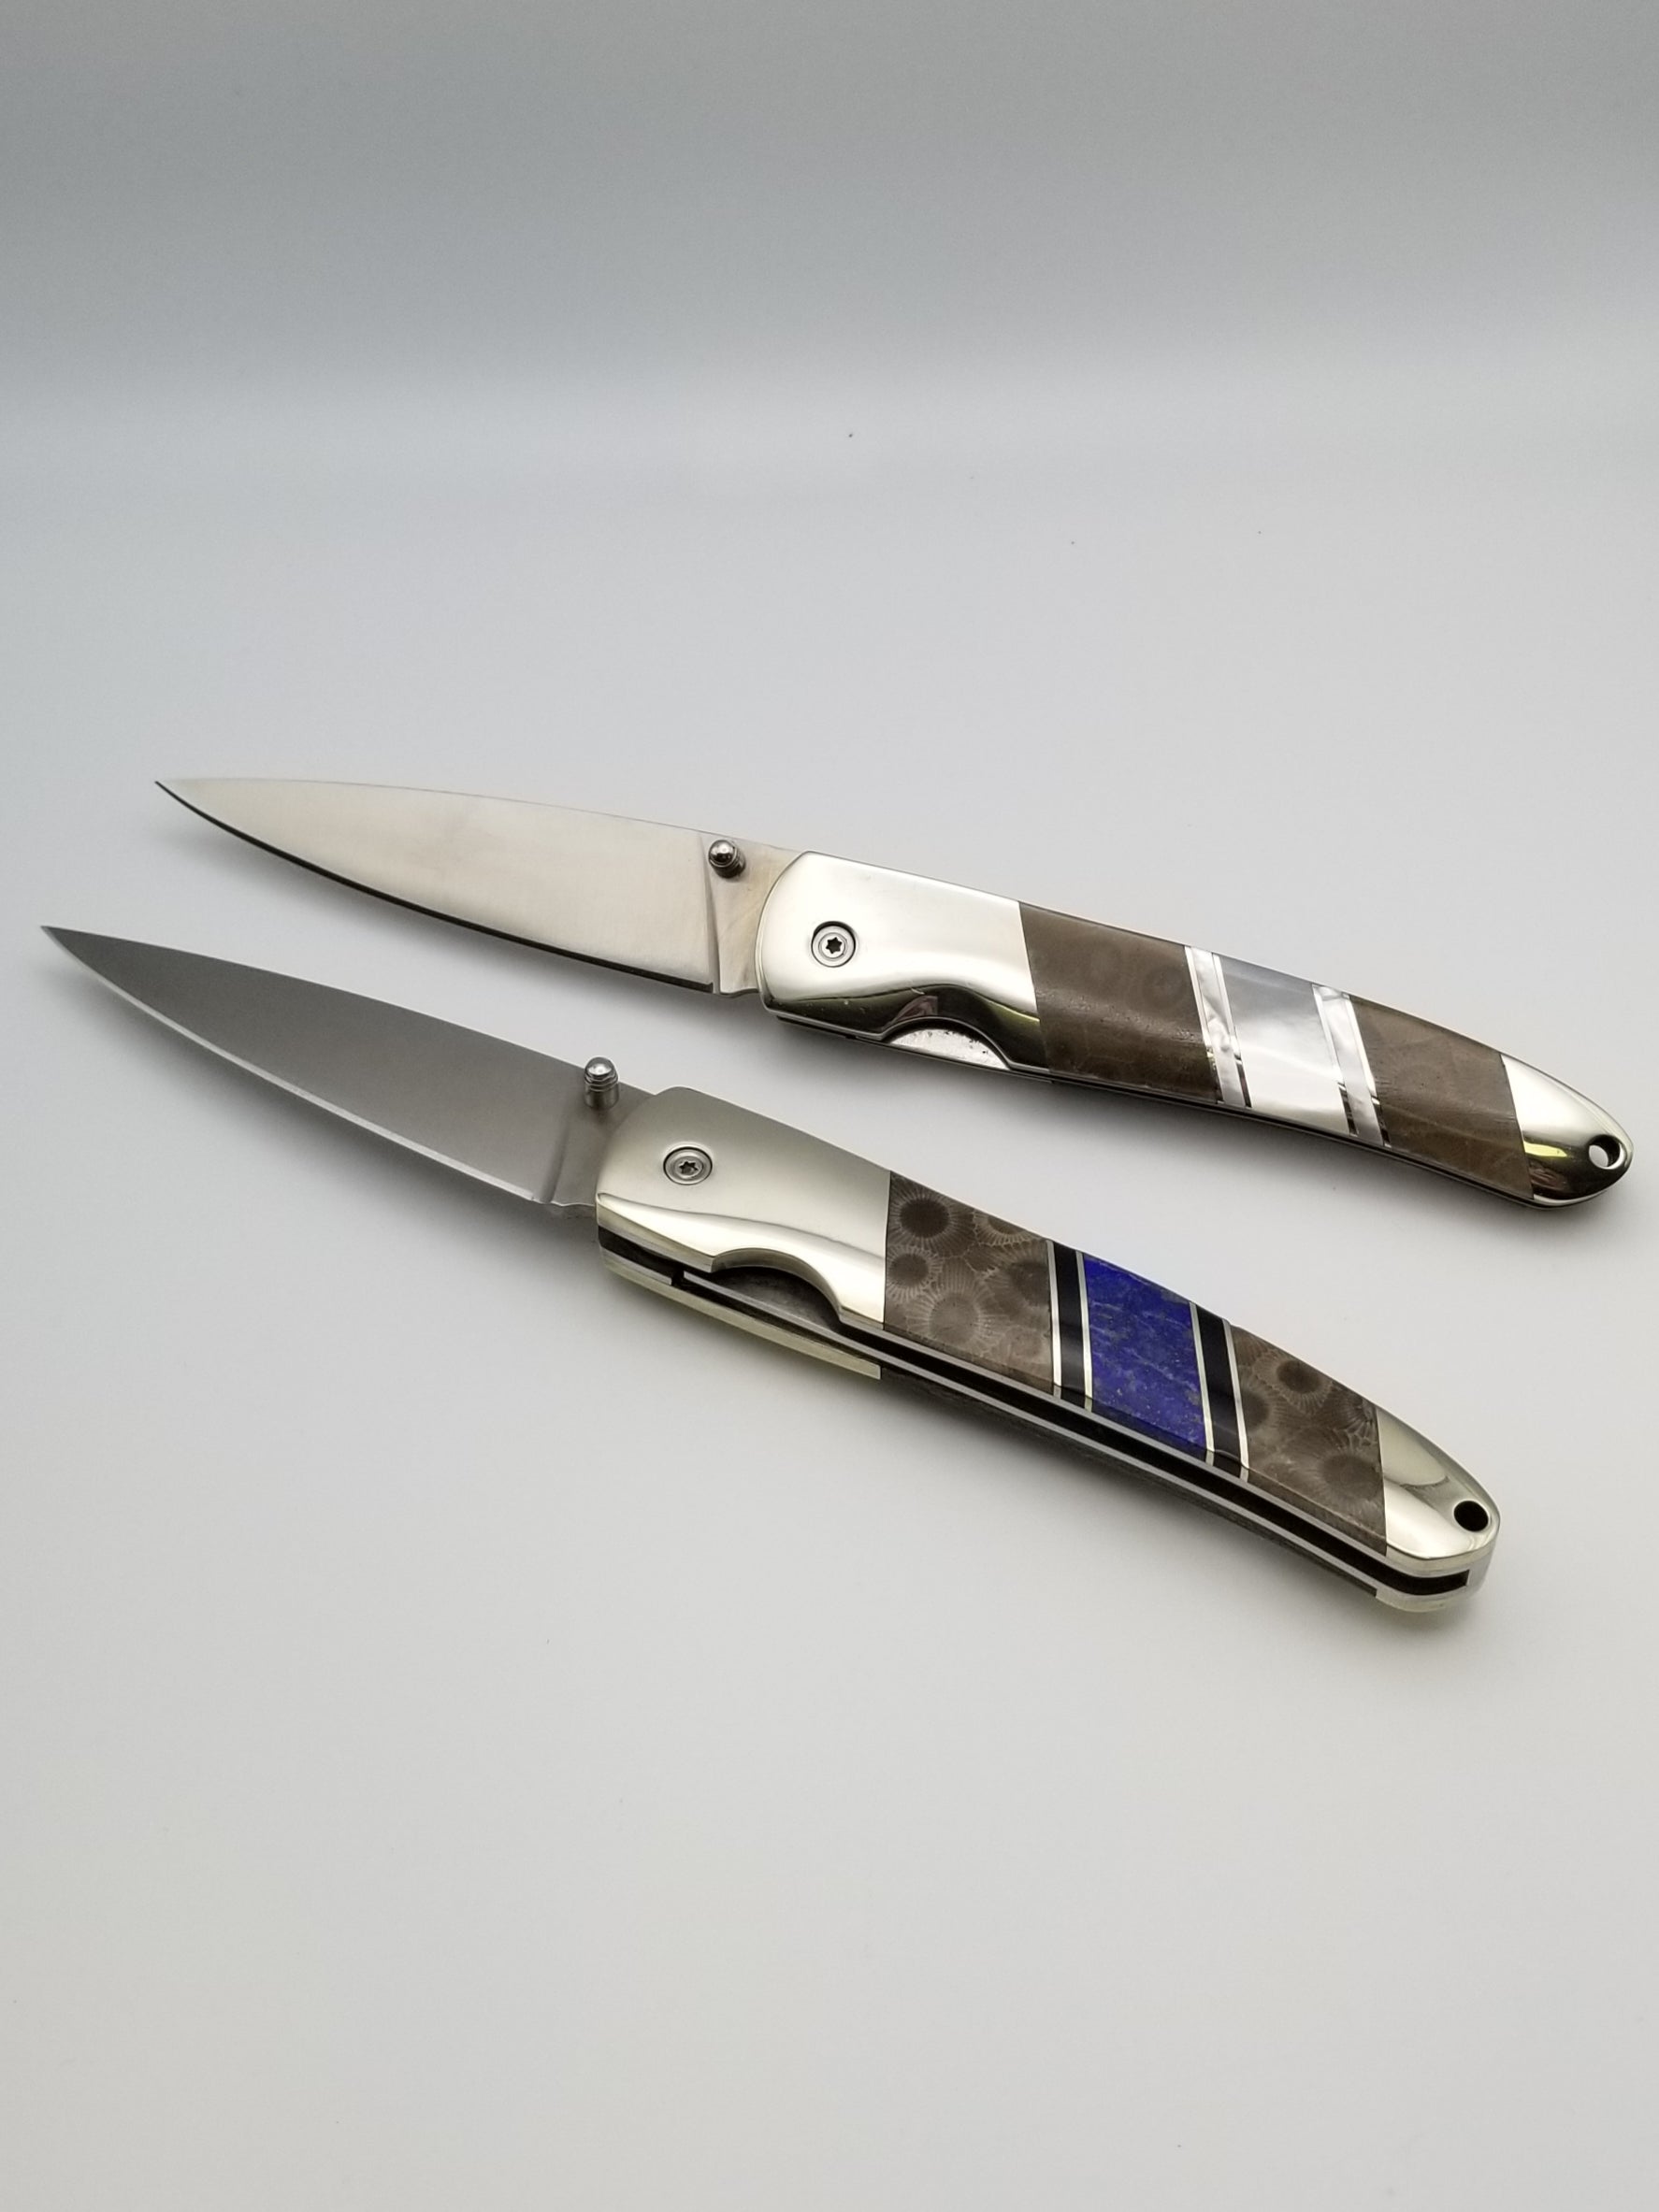 Two assisted open lockback style pocket knives laying opened horizontally. The top one has both petoskey stone and an inlay of mother of pearl. The bottom knife has both petoskey stone and lapis-lazuli inlay.